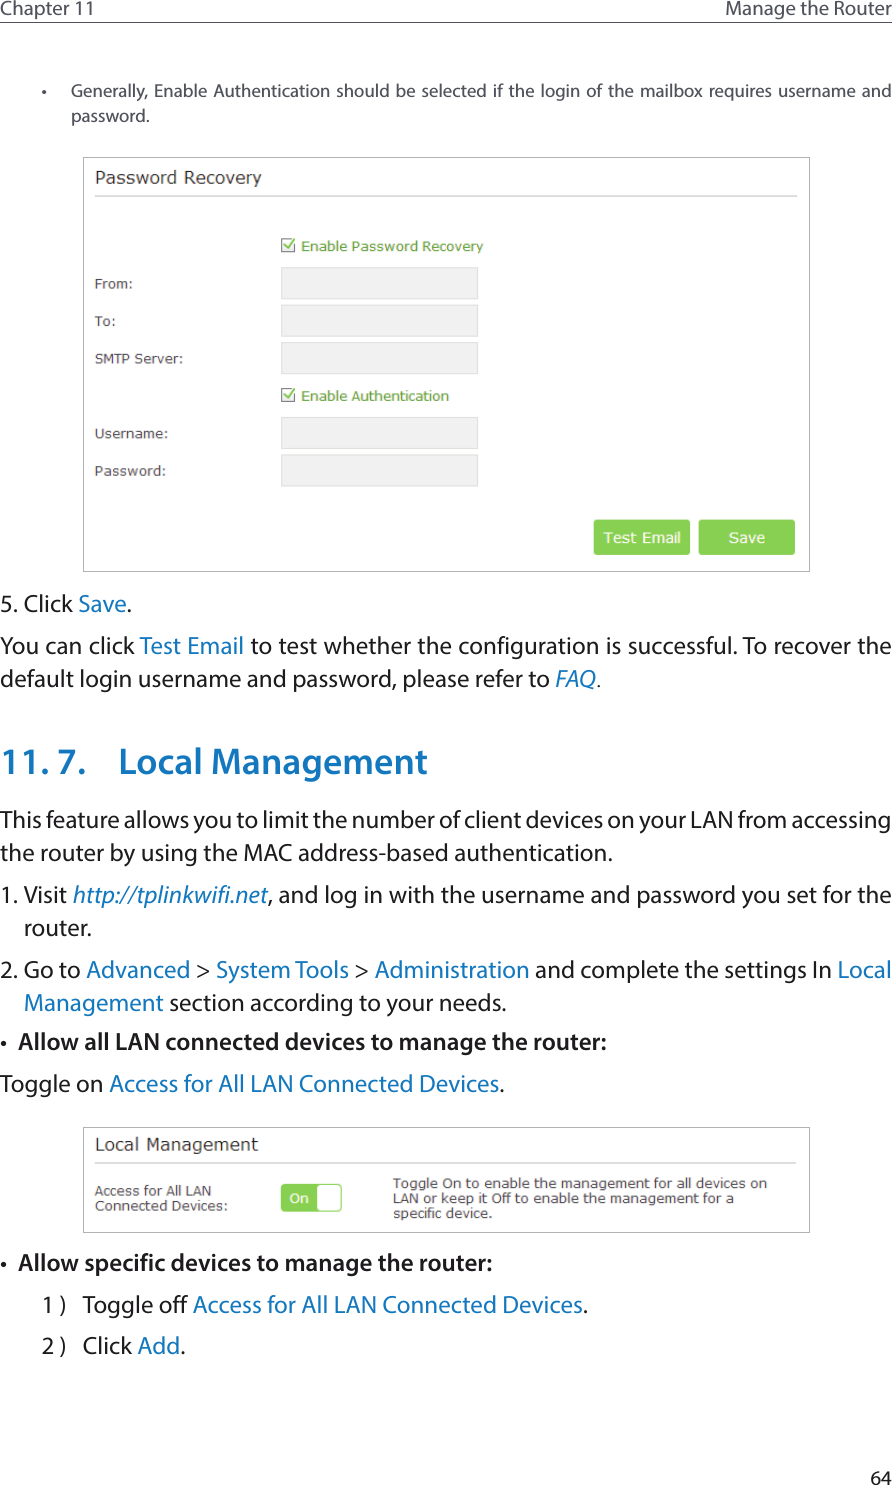 64Chapter 11 Manage the Router •  Generally, Enable Authentication should be selected if the login of the mailbox requires username and password. 5. Click Save.You can click Test Email to test whether the configuration is successful. To recover the default login username and password, please refer to FAQ.11. 7.  Local ManagementThis feature allows you to limit the number of client devices on your LAN from accessing the router by using the MAC address-based authentication.1. Visit http://tplinkwifi.net, and log in with the username and password you set for the router.2. Go to Advanced &gt; System Tools &gt; Administration and complete the settings In Local Management section according to your needs.•  Allow all LAN connected devices to manage the router: Toggle on Access for All LAN Connected Devices.•  Allow specific devices to manage the router: 1 )  Toggle off Access for All LAN Connected Devices.2 )  Click Add.